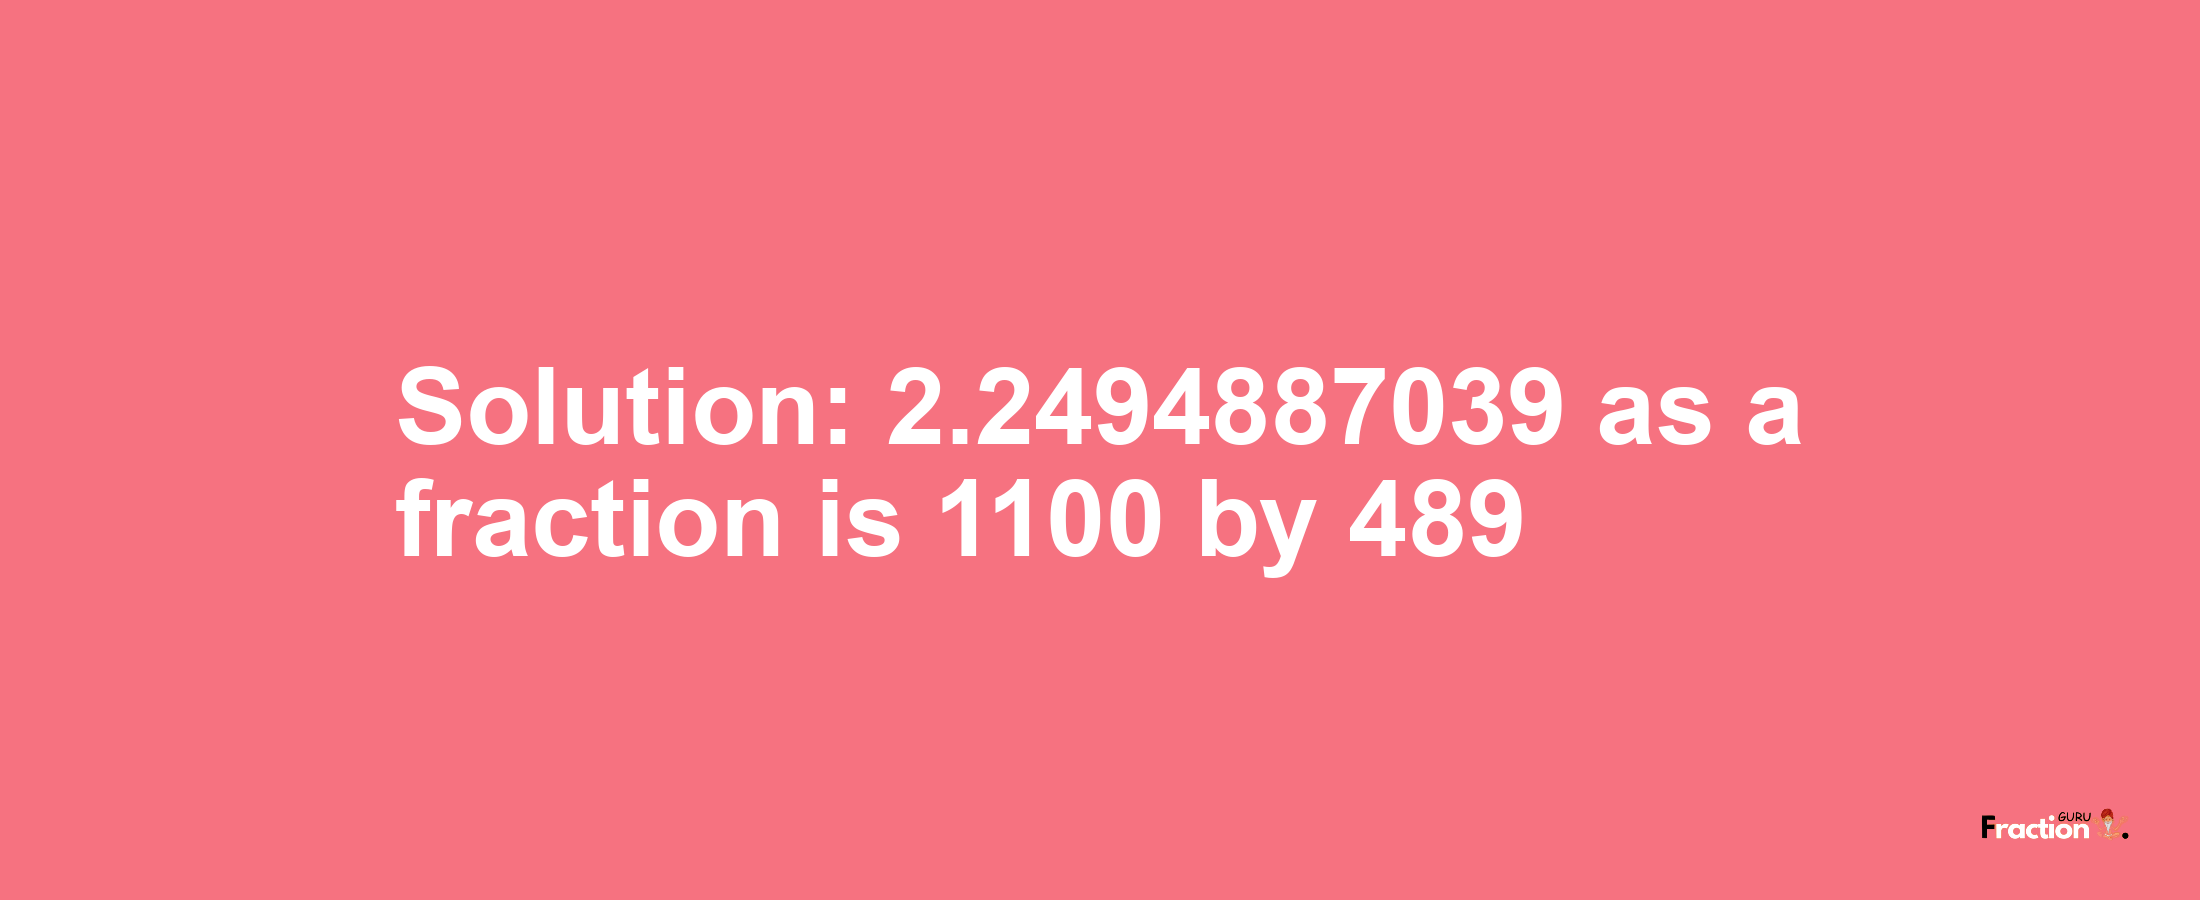 Solution:2.2494887039 as a fraction is 1100/489